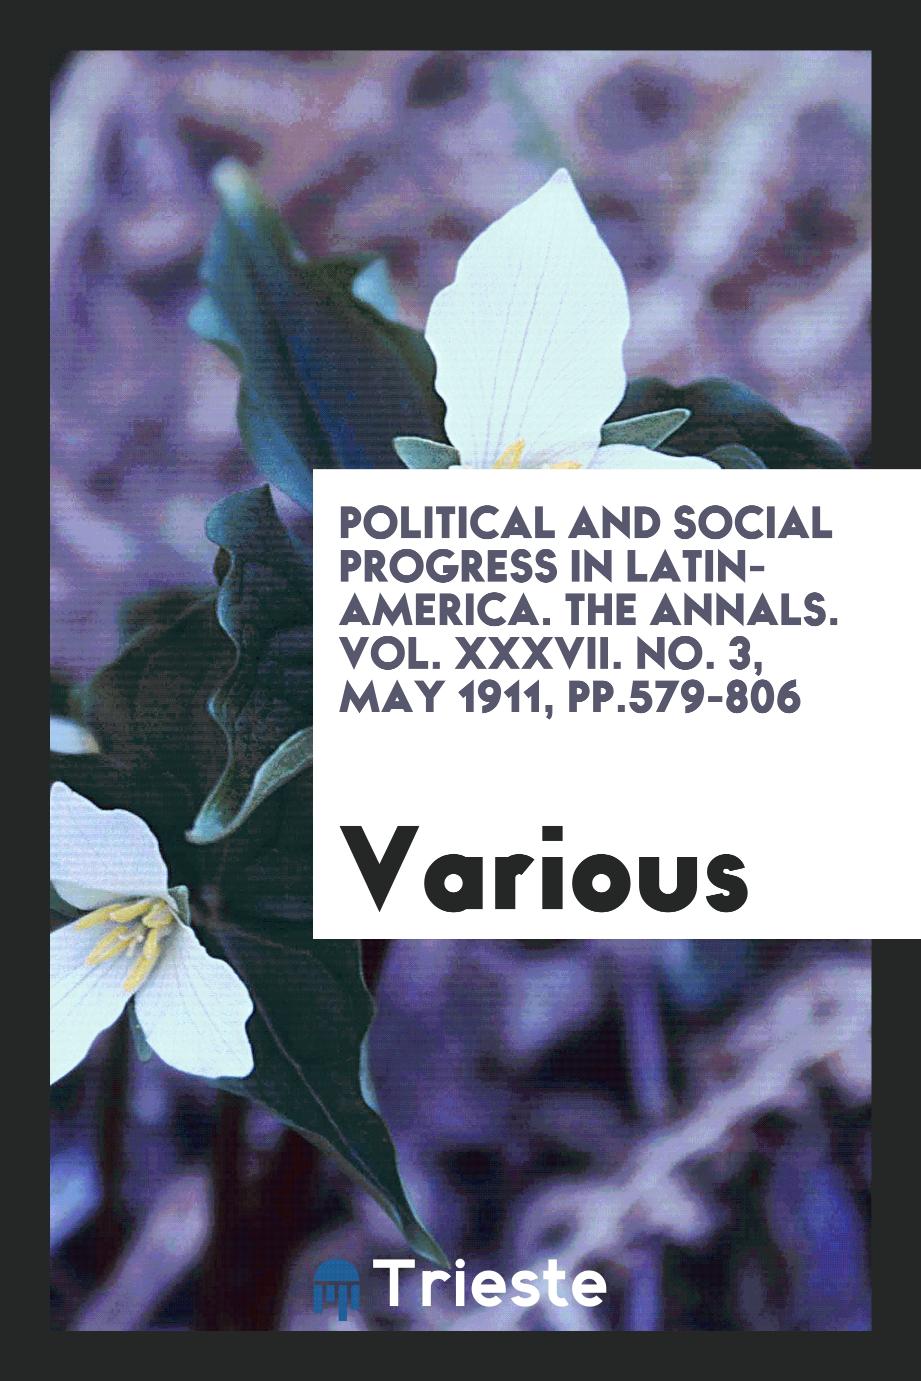 Political and social progress in Latin-America. The Annals. Vol. XXXVII. No. 3, May 1911, pp.579-806